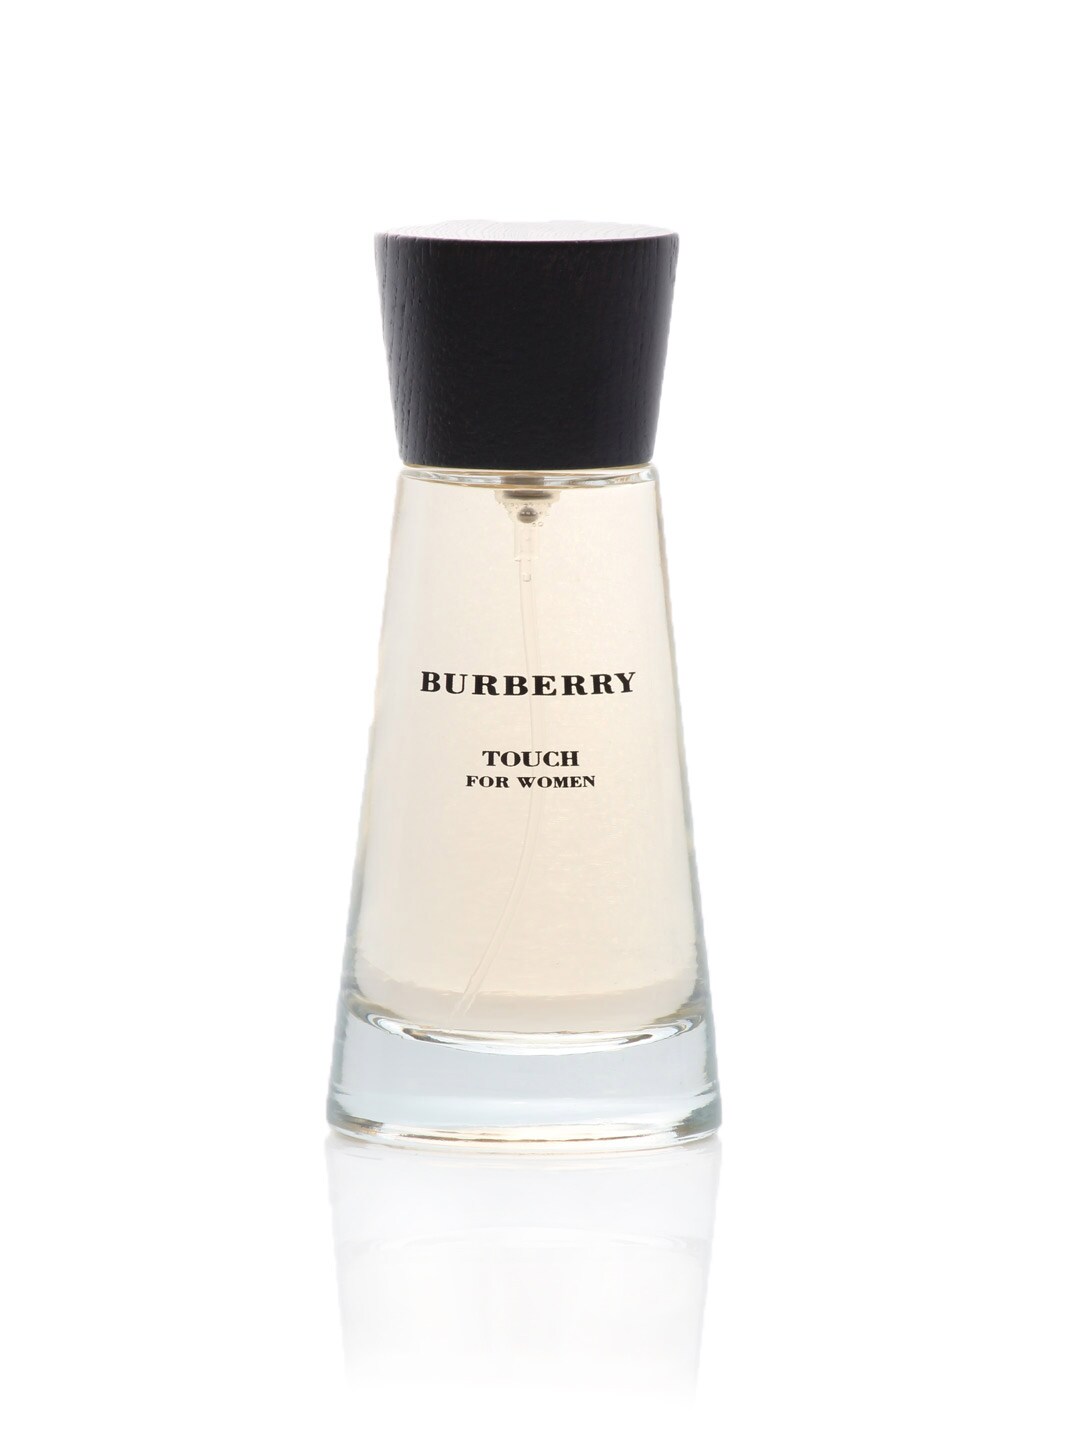 Burberry Women Touch Perfume